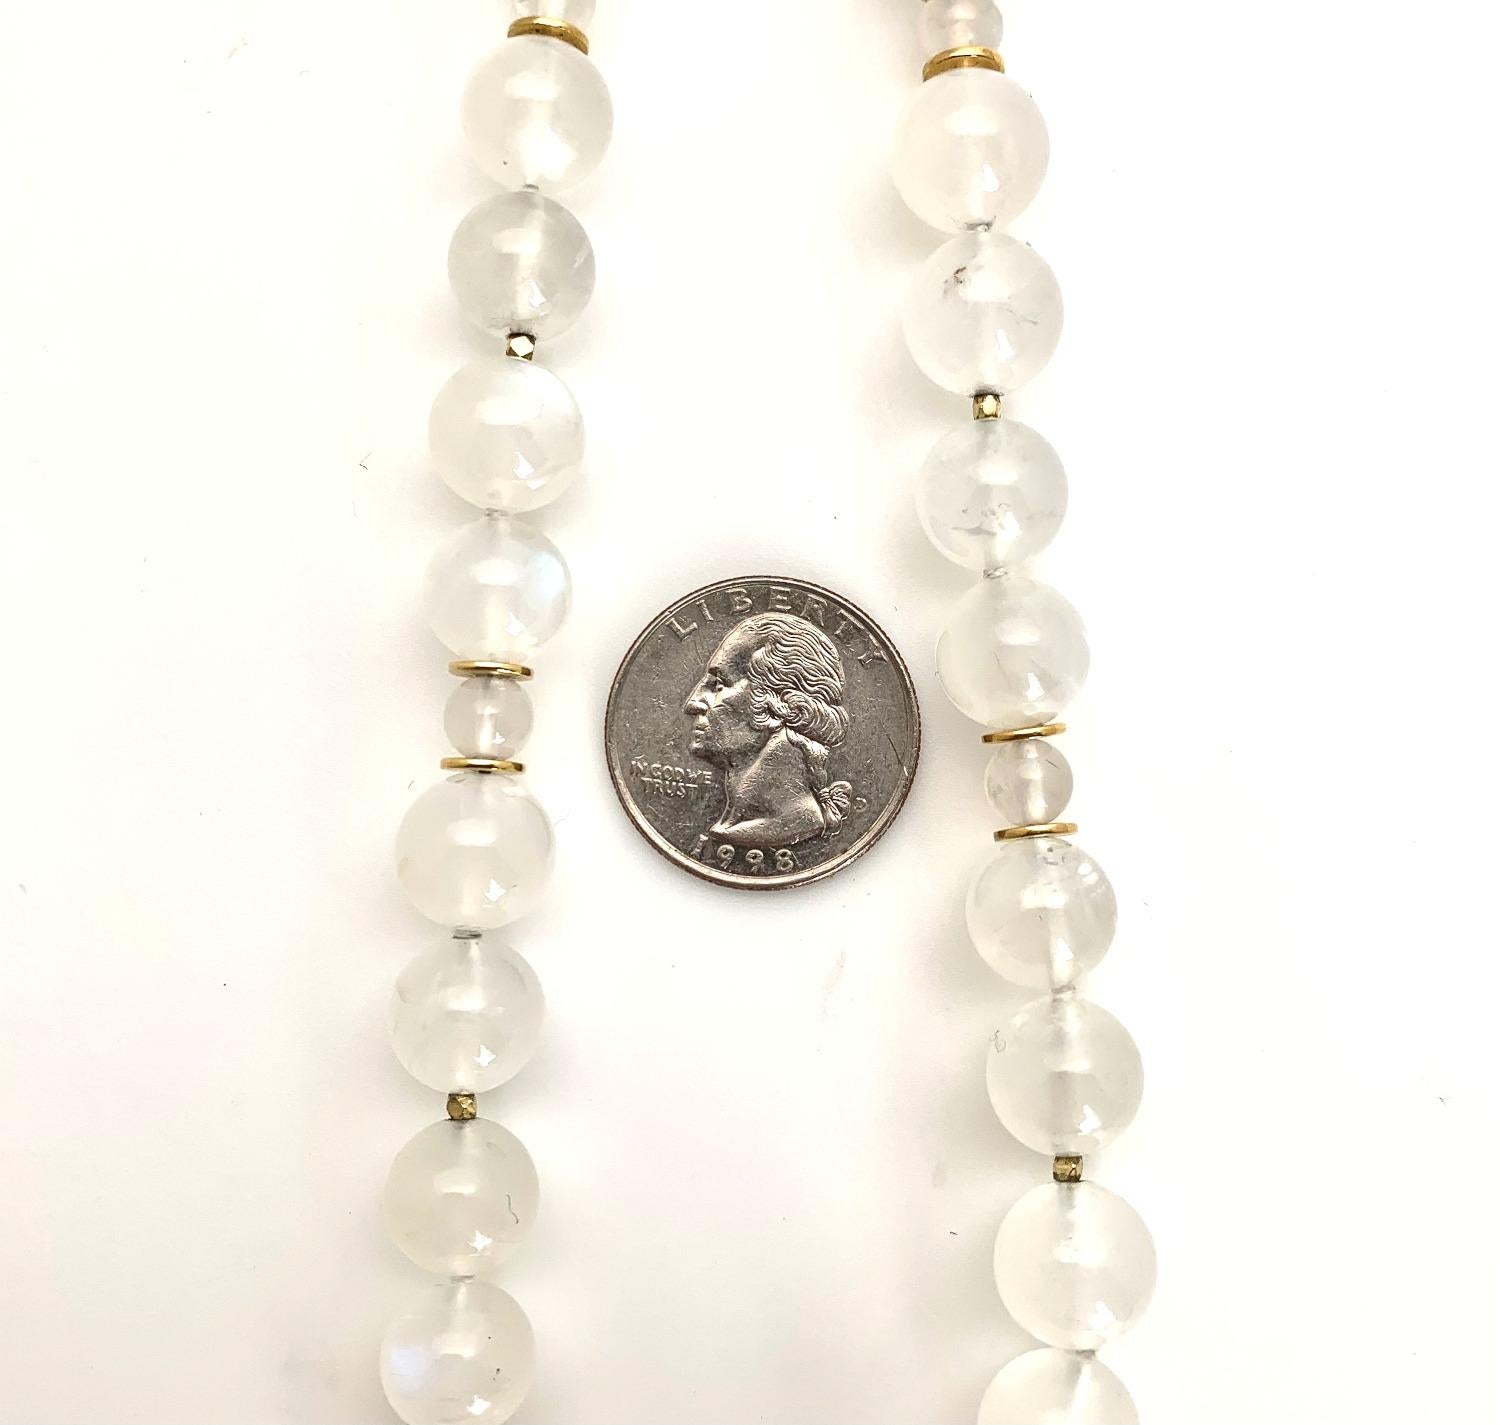 This stunning moonstone beaded necklace has an ethereal glow, featuring unusually large, 12mm round moonstone beads that have been hand-strung with smaller round moonstone beads. 22k yellow gold discs, spacers, and an 18k yellow gold lobster clasp